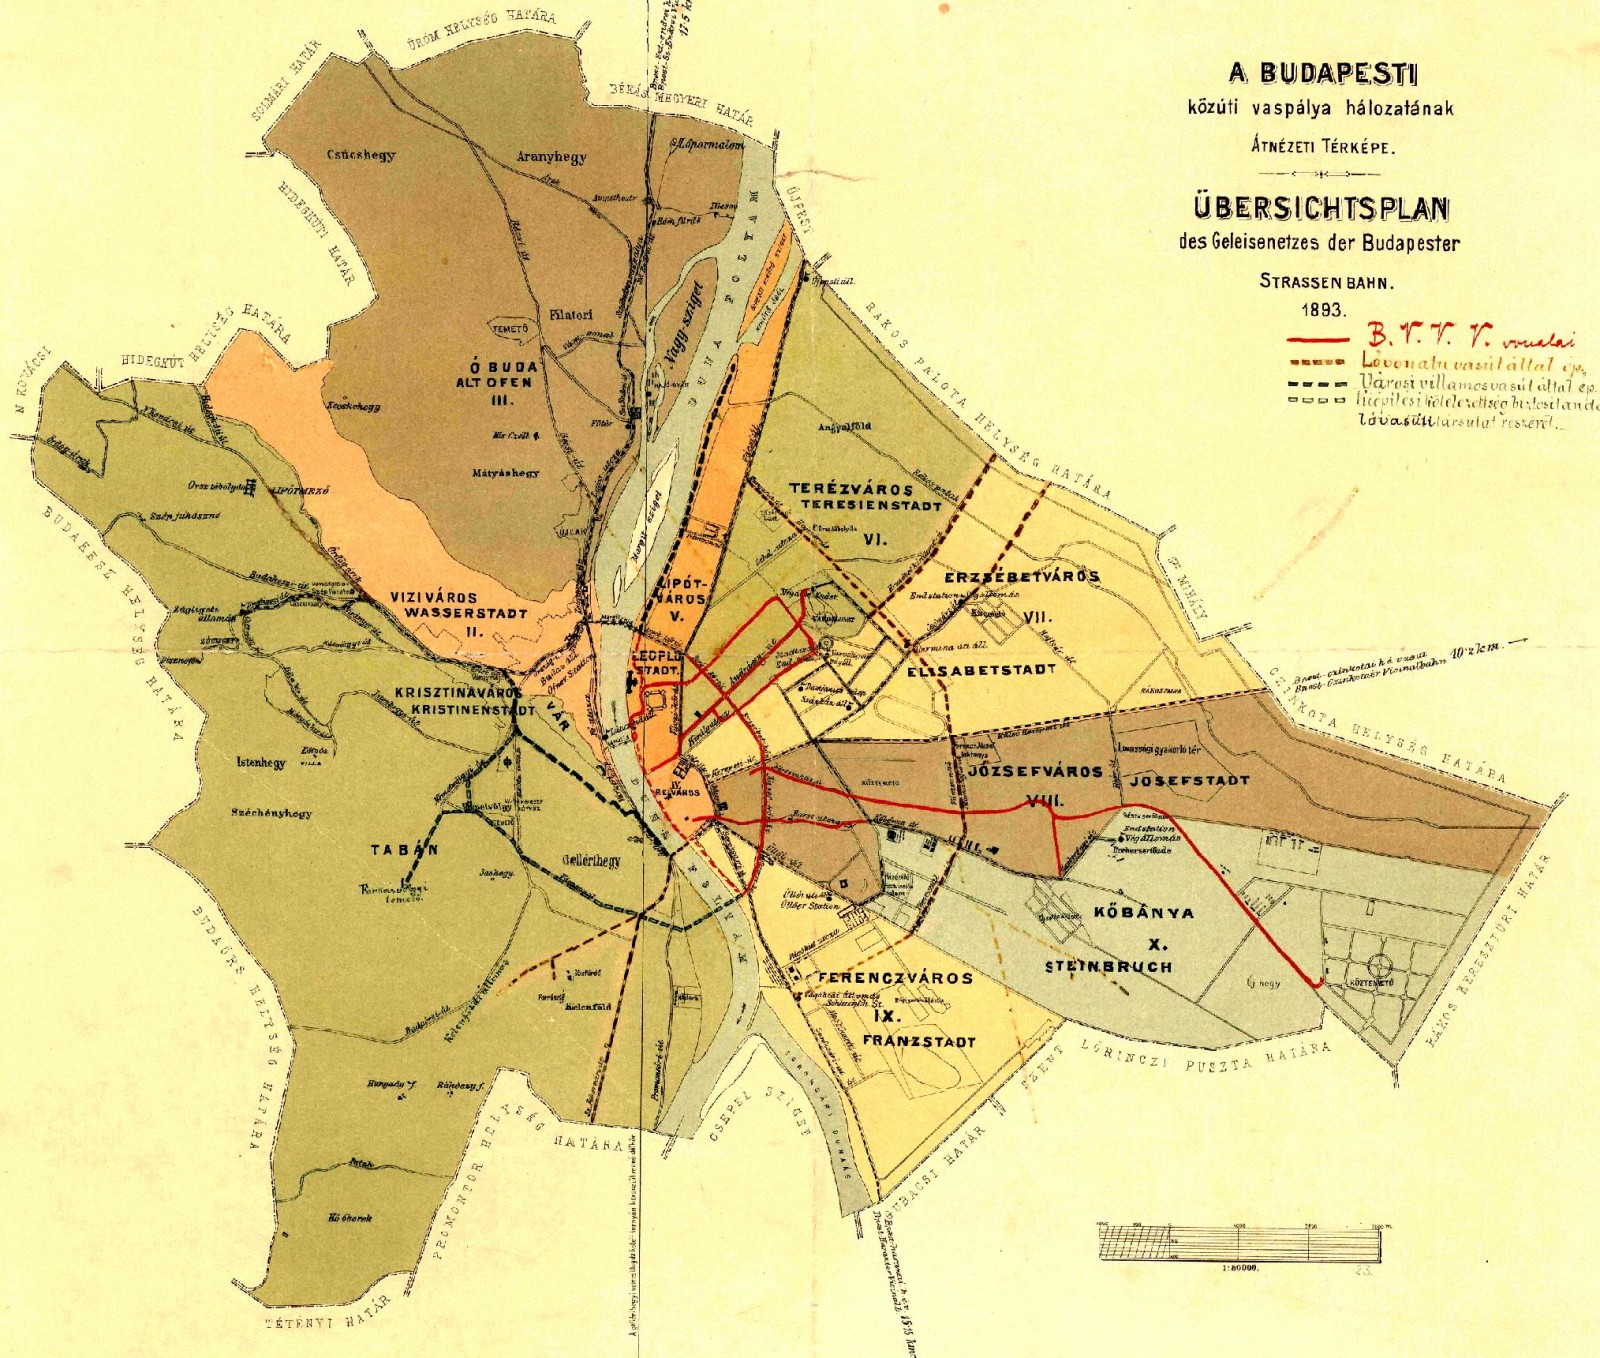 Old map about the (then) newly united Budapest